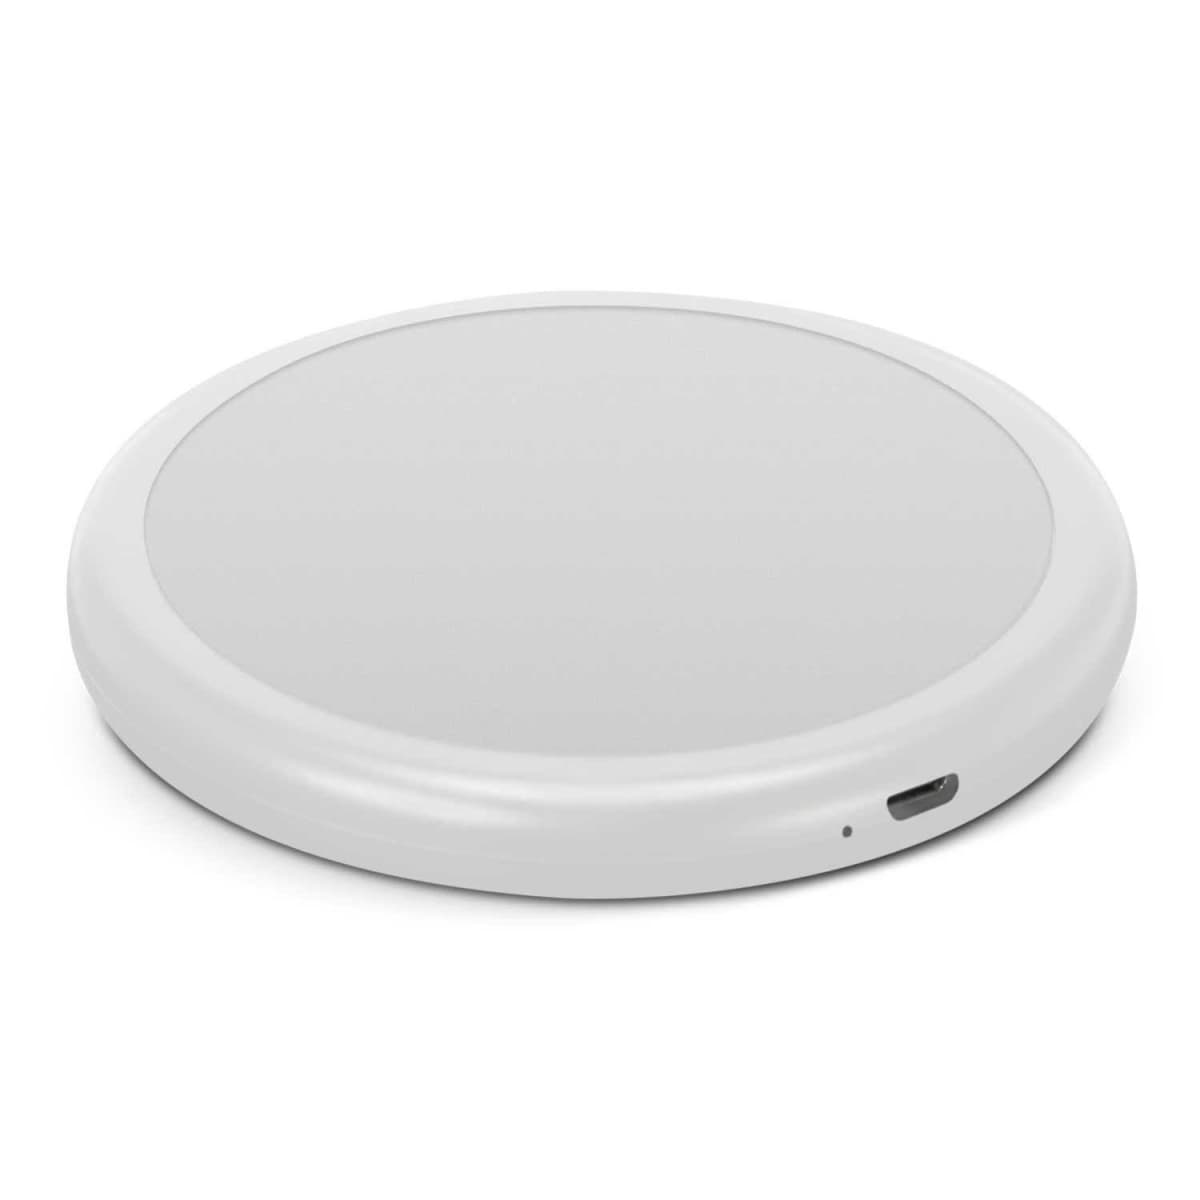 Imperium Round Wireless Charger - Resin Finish